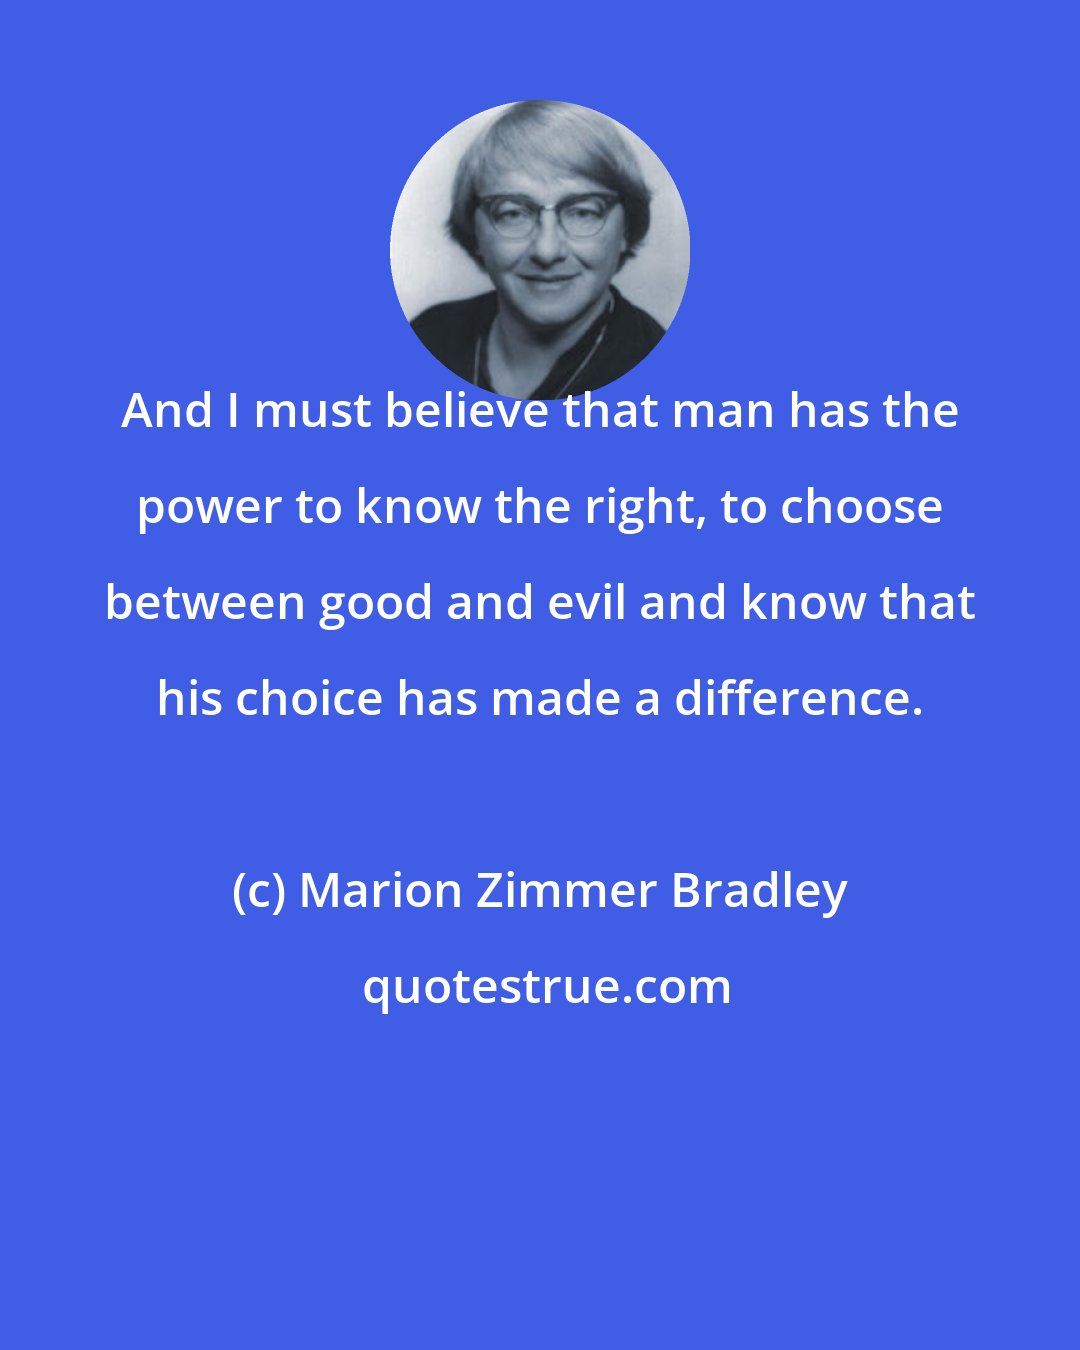 Marion Zimmer Bradley: And I must believe that man has the power to know the right, to choose between good and evil and know that his choice has made a difference.